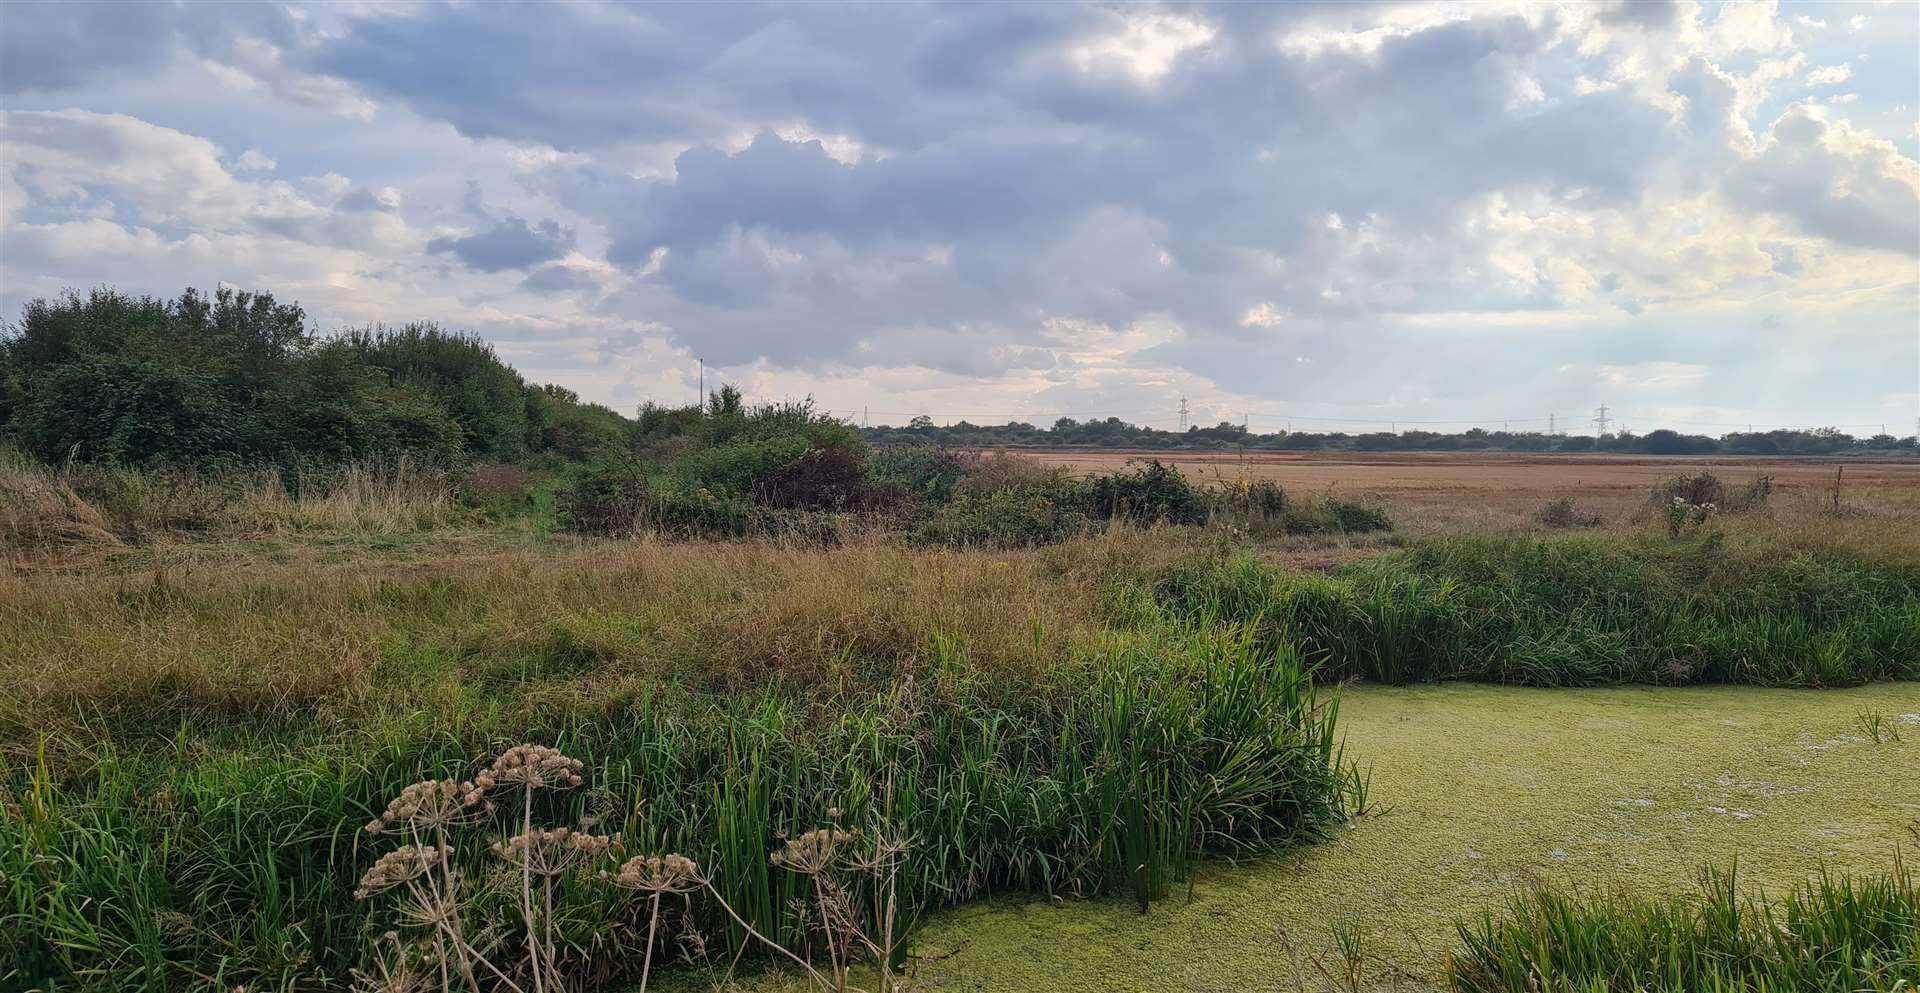 Minster marshes are a precious refuge for wildlife